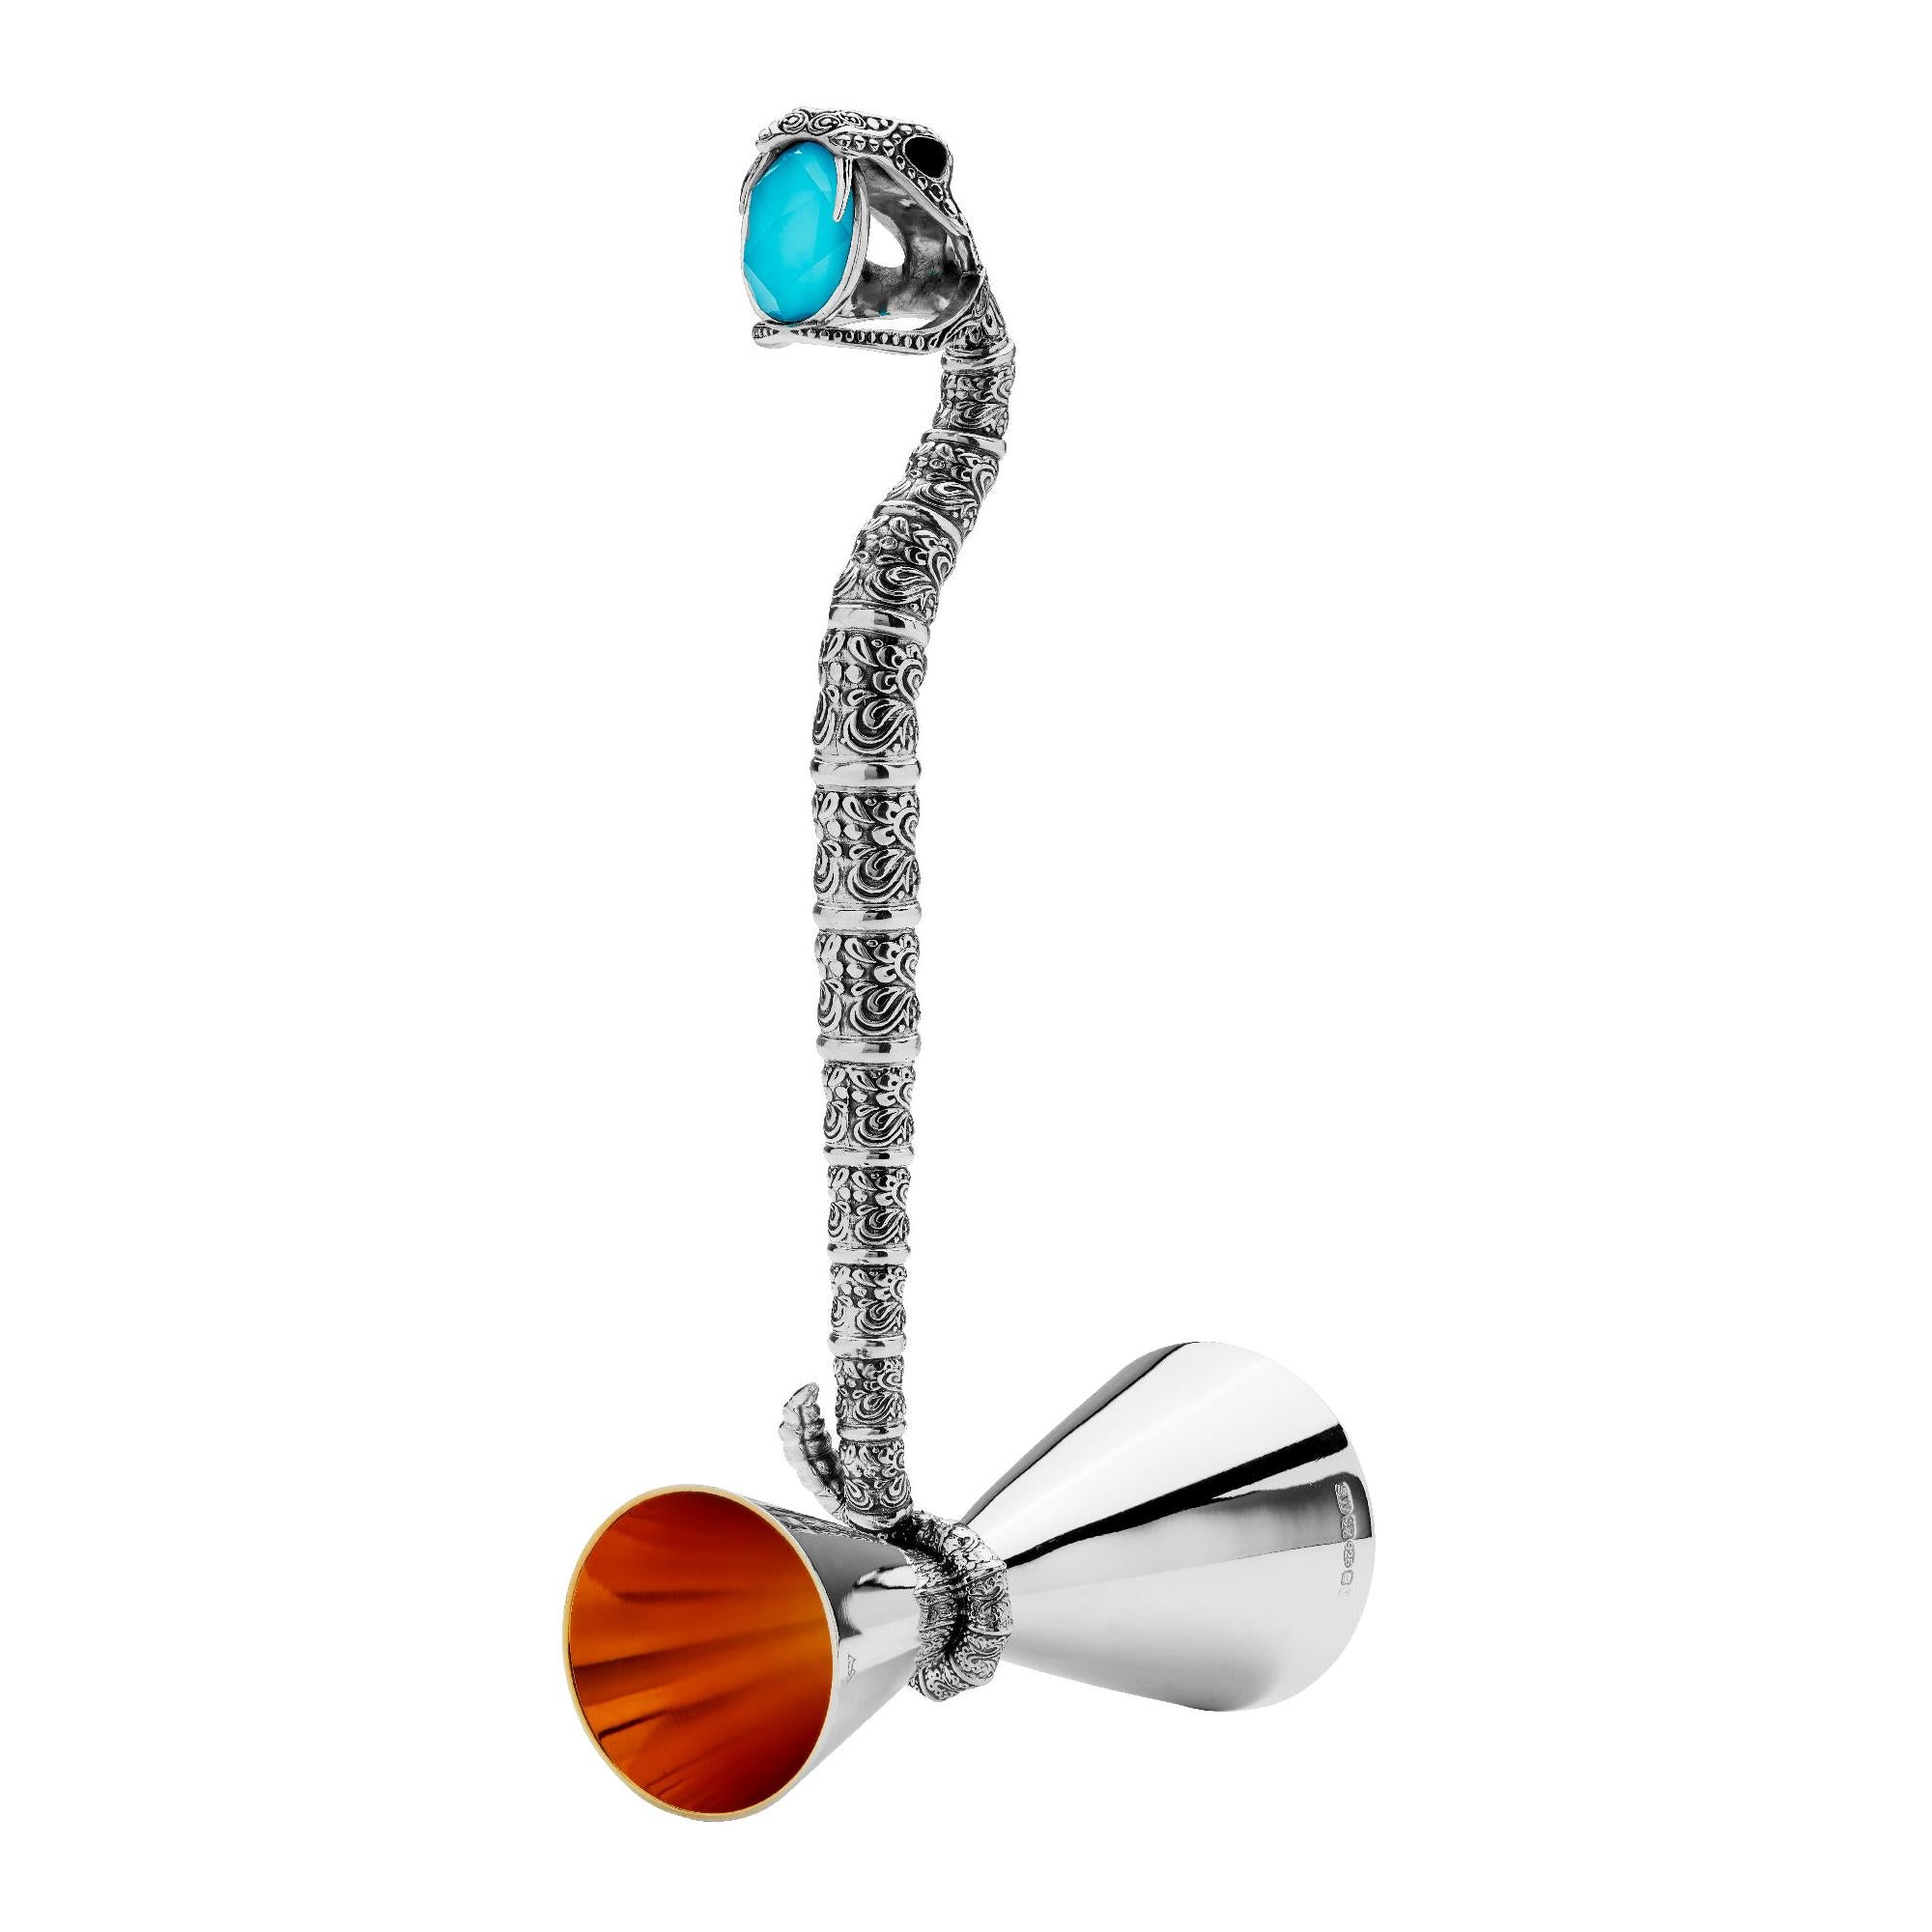 Stephen Webster Tequila Lore Snake Silver Measurer with Turquoise Crystal Haze For Sale